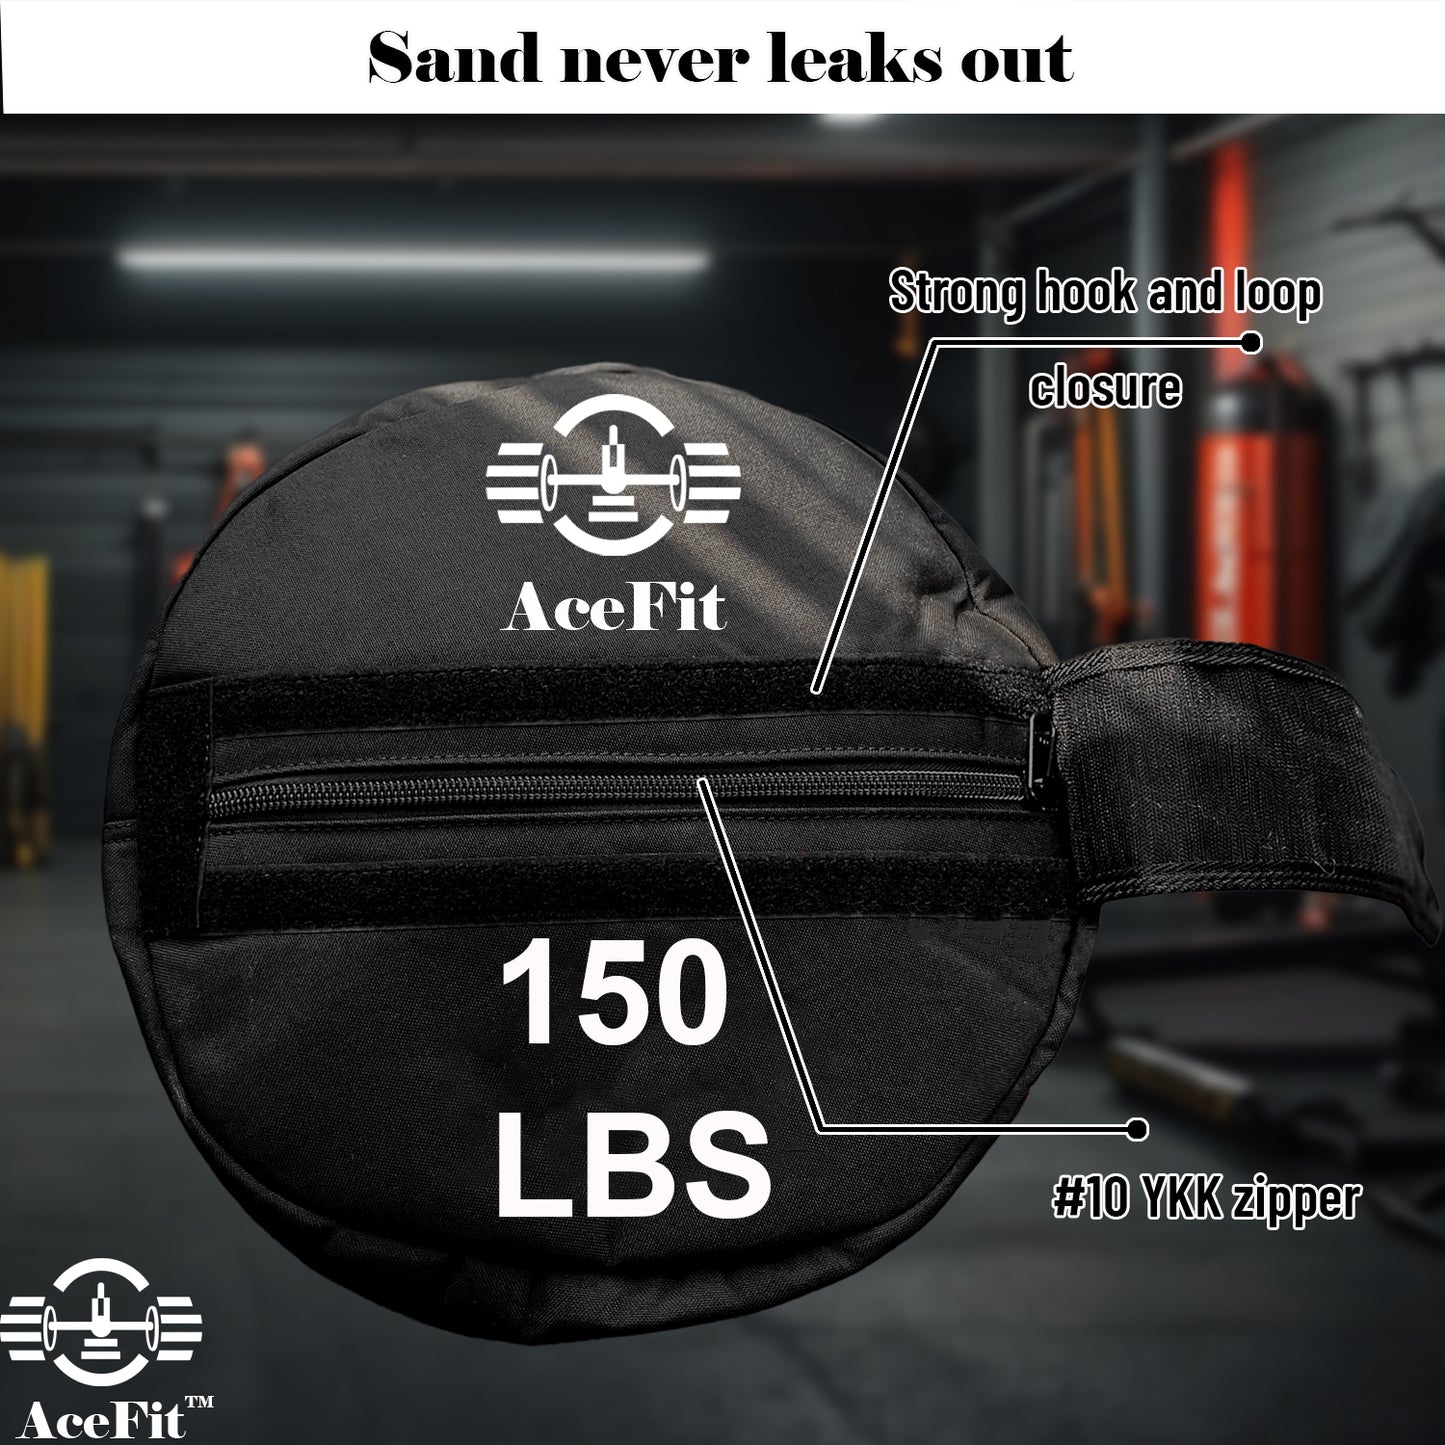 Heavy duty sandbags for working out